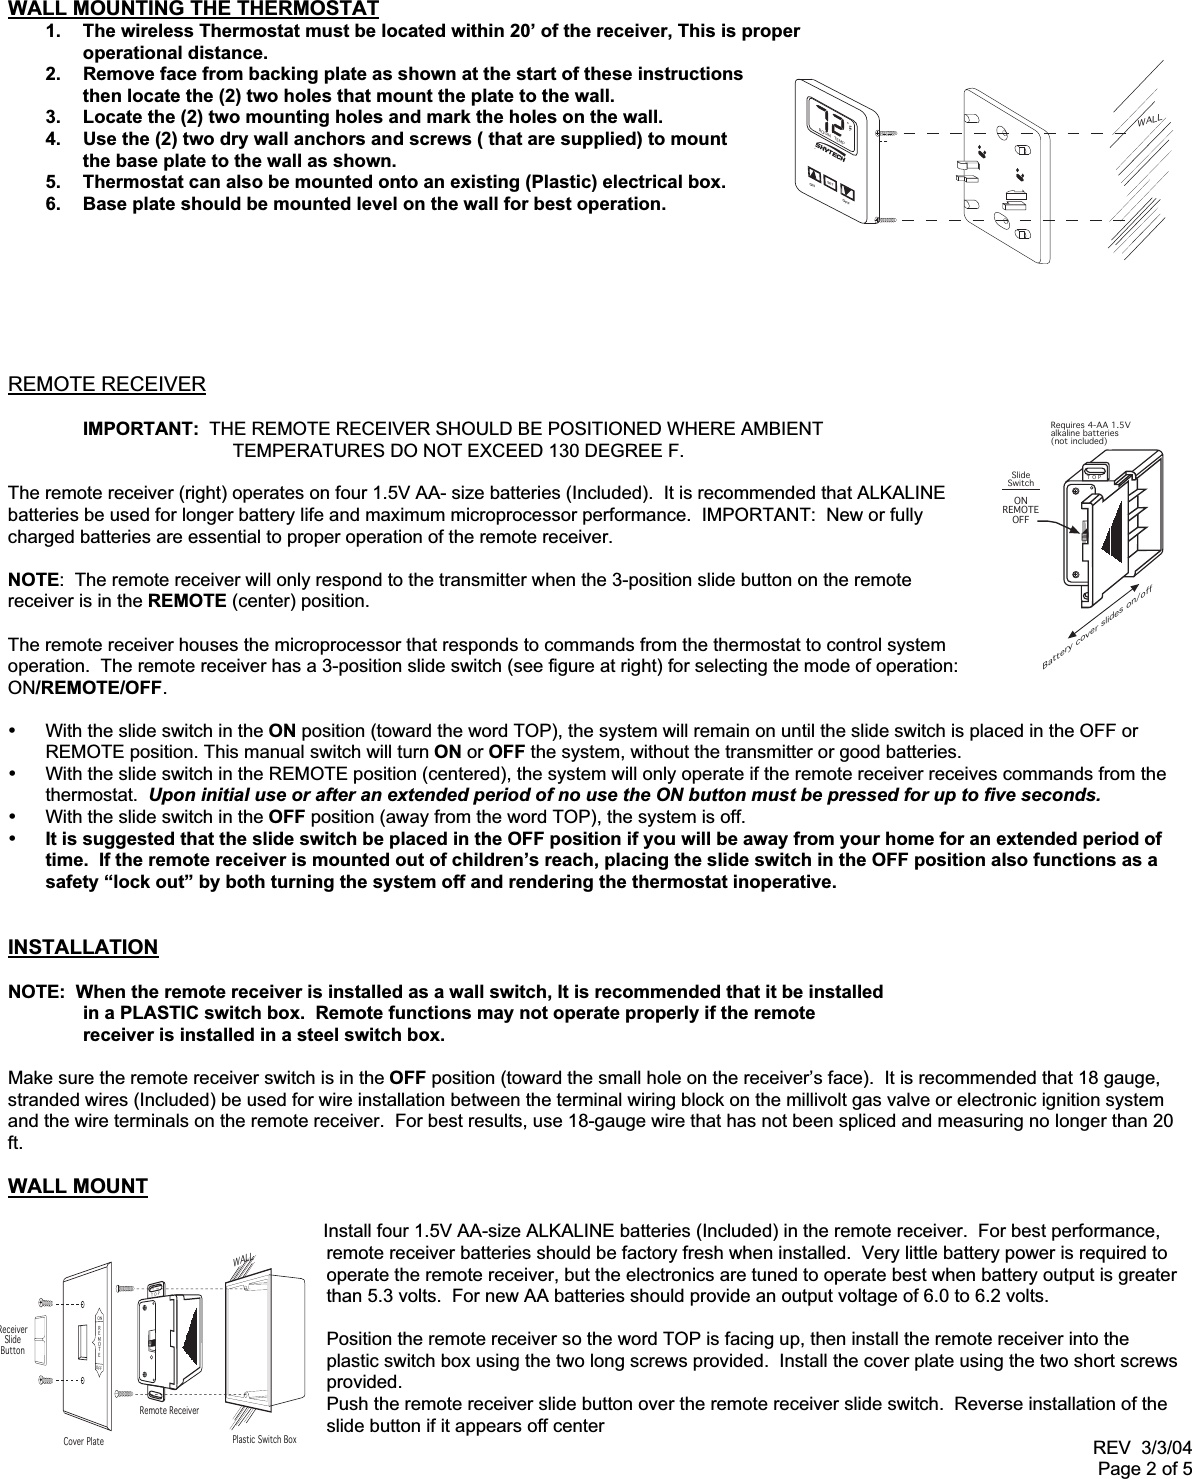 REV  3/3/04Page 2 of 5TOPRequires 4-AA 1.5Valkaline batteries(not included)Battery cover slides on/offSlideSwitchONREMOTEOFFWALLPlastic Switch BoxRemote ReceiverCover PlateReceiverSlideButtonTOPREMOTEONOFFWALL MOUNTING THE THERMOSTAT1.  The wireless Thermostat must be located within 20’ of the receiver, This is properoperational distance.2.  Remove face from backing plate as shown at the start of these instructionsthen locate the (2) two holes that mount the plate to the wall.3.  Locate the (2) two mounting holes and mark the holes on the wall.4.  Use the (2) two dry wall anchors and screws ( that are supplied) to mountthe base plate to the wall as shown.5.  Thermostat can also be mounted onto an existing (Plastic) electrical box.6.  Base plate should be mounted level on the wall for best operation.REMOTE RECEIVERIMPORTANT:  THE REMOTE RECEIVER SHOULD BE POSITIONED WHERE AMBIENT TEMPERATURES DO NOT EXCEED 130 DEGREE F.The remote receiver (right) operates on four 1.5V AA- size batteries (Included).  It is recommended that ALKALINEbatteries be used for longer battery life and maximum microprocessor performance.  IMPORTANT:  New or fullycharged batteries are essential to proper operation of the remote receiver.NOTE:  The remote receiver will only respond to the transmitter when the 3-position slide button on the remotereceiver is in the REMOTE (center) position.The remote receiver houses the microprocessor that responds to commands from the thermostat to control systemoperation.  The remote receiver has a 3-position slide switch (see figure at right) for selecting the mode of operation:ON/REMOTE/OFF.•  With the slide switch in the ON position (toward the word TOP), the system will remain on until the slide switch is placed in the OFF orREMOTE position. This manual switch will turn ON or OFF the system, without the transmitter or good batteries.•  With the slide switch in the REMOTE position (centered), the system will only operate if the remote receiver receives commands from thethermostat.  Upon initial use or after an extended period of no use the ON button must be pressed for up to five seconds.•  With the slide switch in the OFF position (away from the word TOP), the system is off.• It is suggested that the slide switch be placed in the OFF position if you will be away from your home for an extended period oftime.  If the remote receiver is mounted out of children’s reach, placing the slide switch in the OFF position also functions as asafety “lock out” by both turning the system off and rendering the thermostat inoperative.INSTALLATIONNOTE:  When the remote receiver is installed as a wall switch, It is recommended that it be installed in a PLASTIC switch box.  Remote functions may not operate properly if the remotereceiver is installed in a steel switch box.Make sure the remote receiver switch is in the OFF position (toward the small hole on the receiver’s face).  It is recommended that 18 gauge,stranded wires (Included) be used for wire installation between the terminal wiring block on the millivolt gas valve or electronic ignition systemand the wire terminals on the remote receiver.  For best results, use 18-gauge wire that has not been spliced and measuring no longer than 20ft.WALL MOUNT   Install four 1.5V AA-size ALKALINE batteries (Included) in the remote receiver.  For best performance,remote receiver batteries should be factory fresh when installed.  Very little battery power is required tooperate the remote receiver, but the electronics are tuned to operate best when battery output is greaterthan 5.3 volts.  For new AA batteries should provide an output voltage of 6.0 to 6.2 volts.Position the remote receiver so the word TOP is facing up, then install the remote receiver into theplastic switch box using the two long screws provided.  Install the cover plate using the two short screwsprovided.Push the remote receiver slide button over the remote receiver slide switch.  Reverse installation of theslide button if it appears off centerWALLROOM TEMPON OFFSET